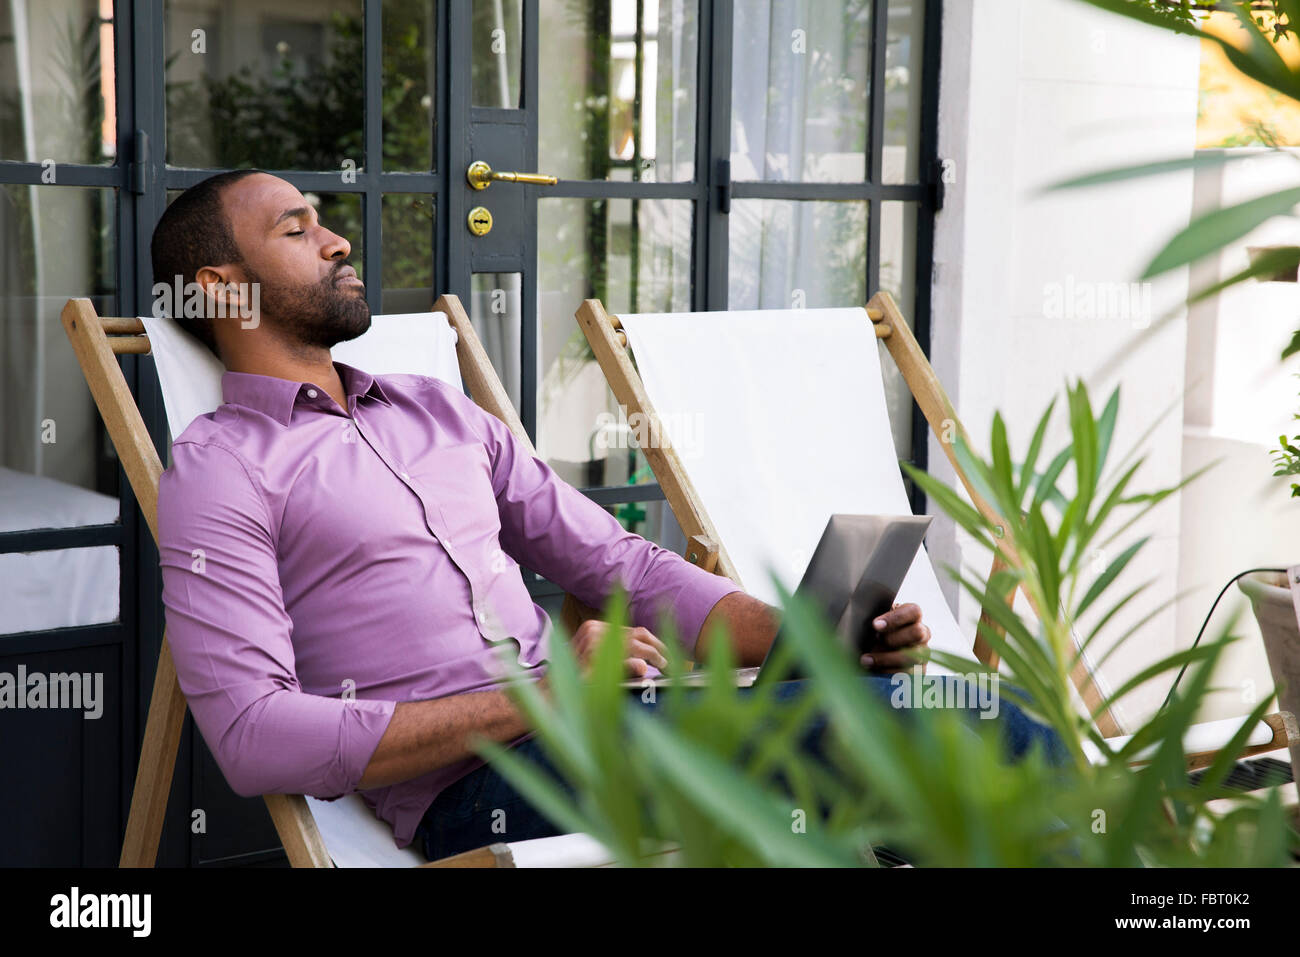 Man napping in deckchair Stock Photo